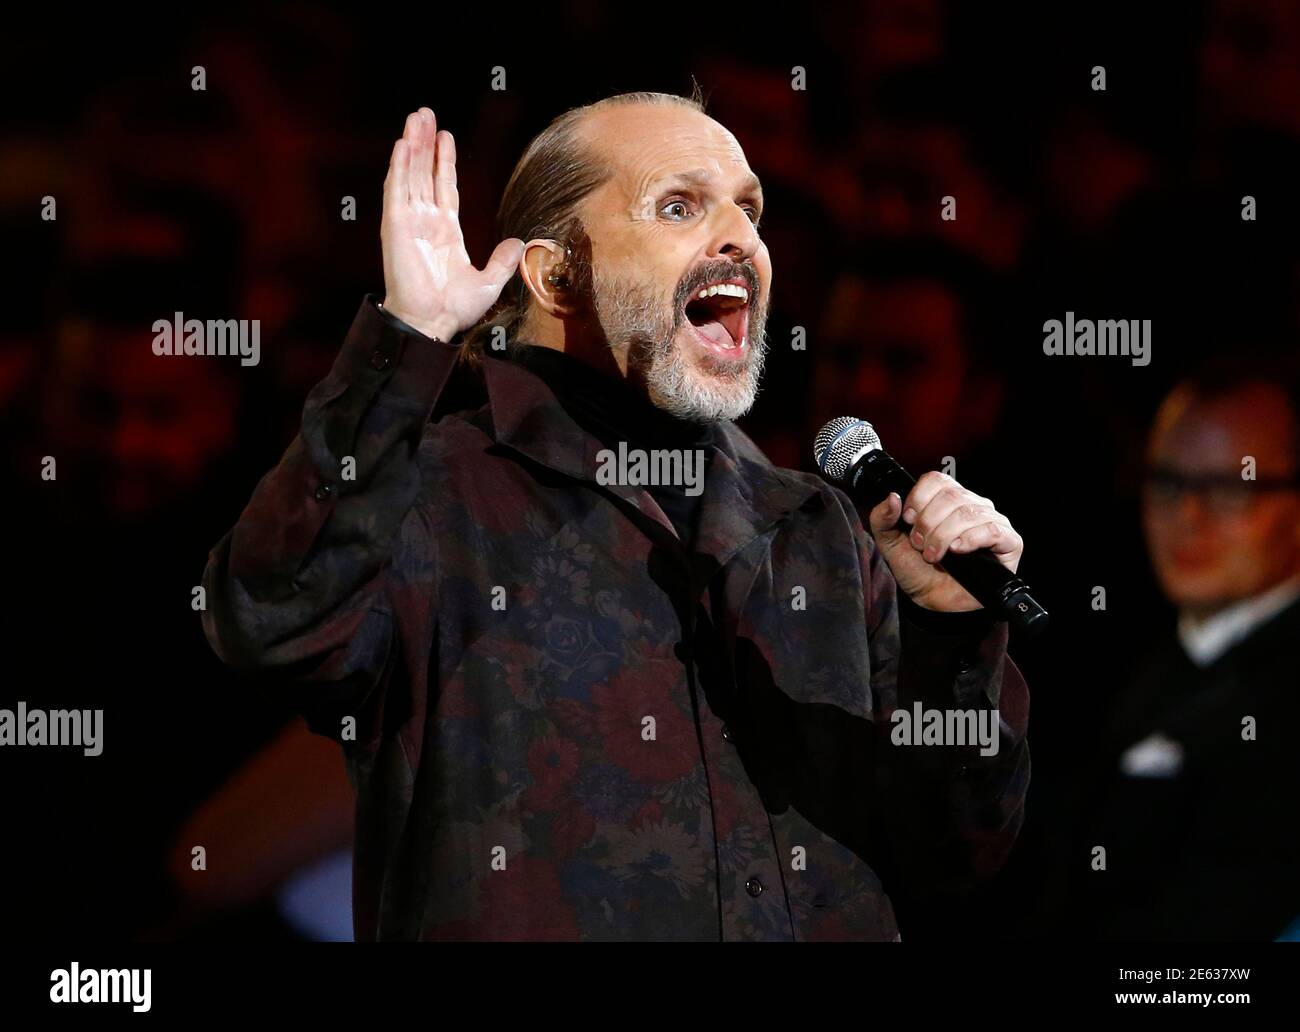 Miguel Bose performs "Siempre En Mi Mente" with Pepe Aguilar (not pictured)  at the15th Annual Latin Grammy Awards in Las Vegas, Nevada November 20,  2014. REUTERS/Mike Blake (UNITED STATES - Tags: ENTERTAINMENT) (